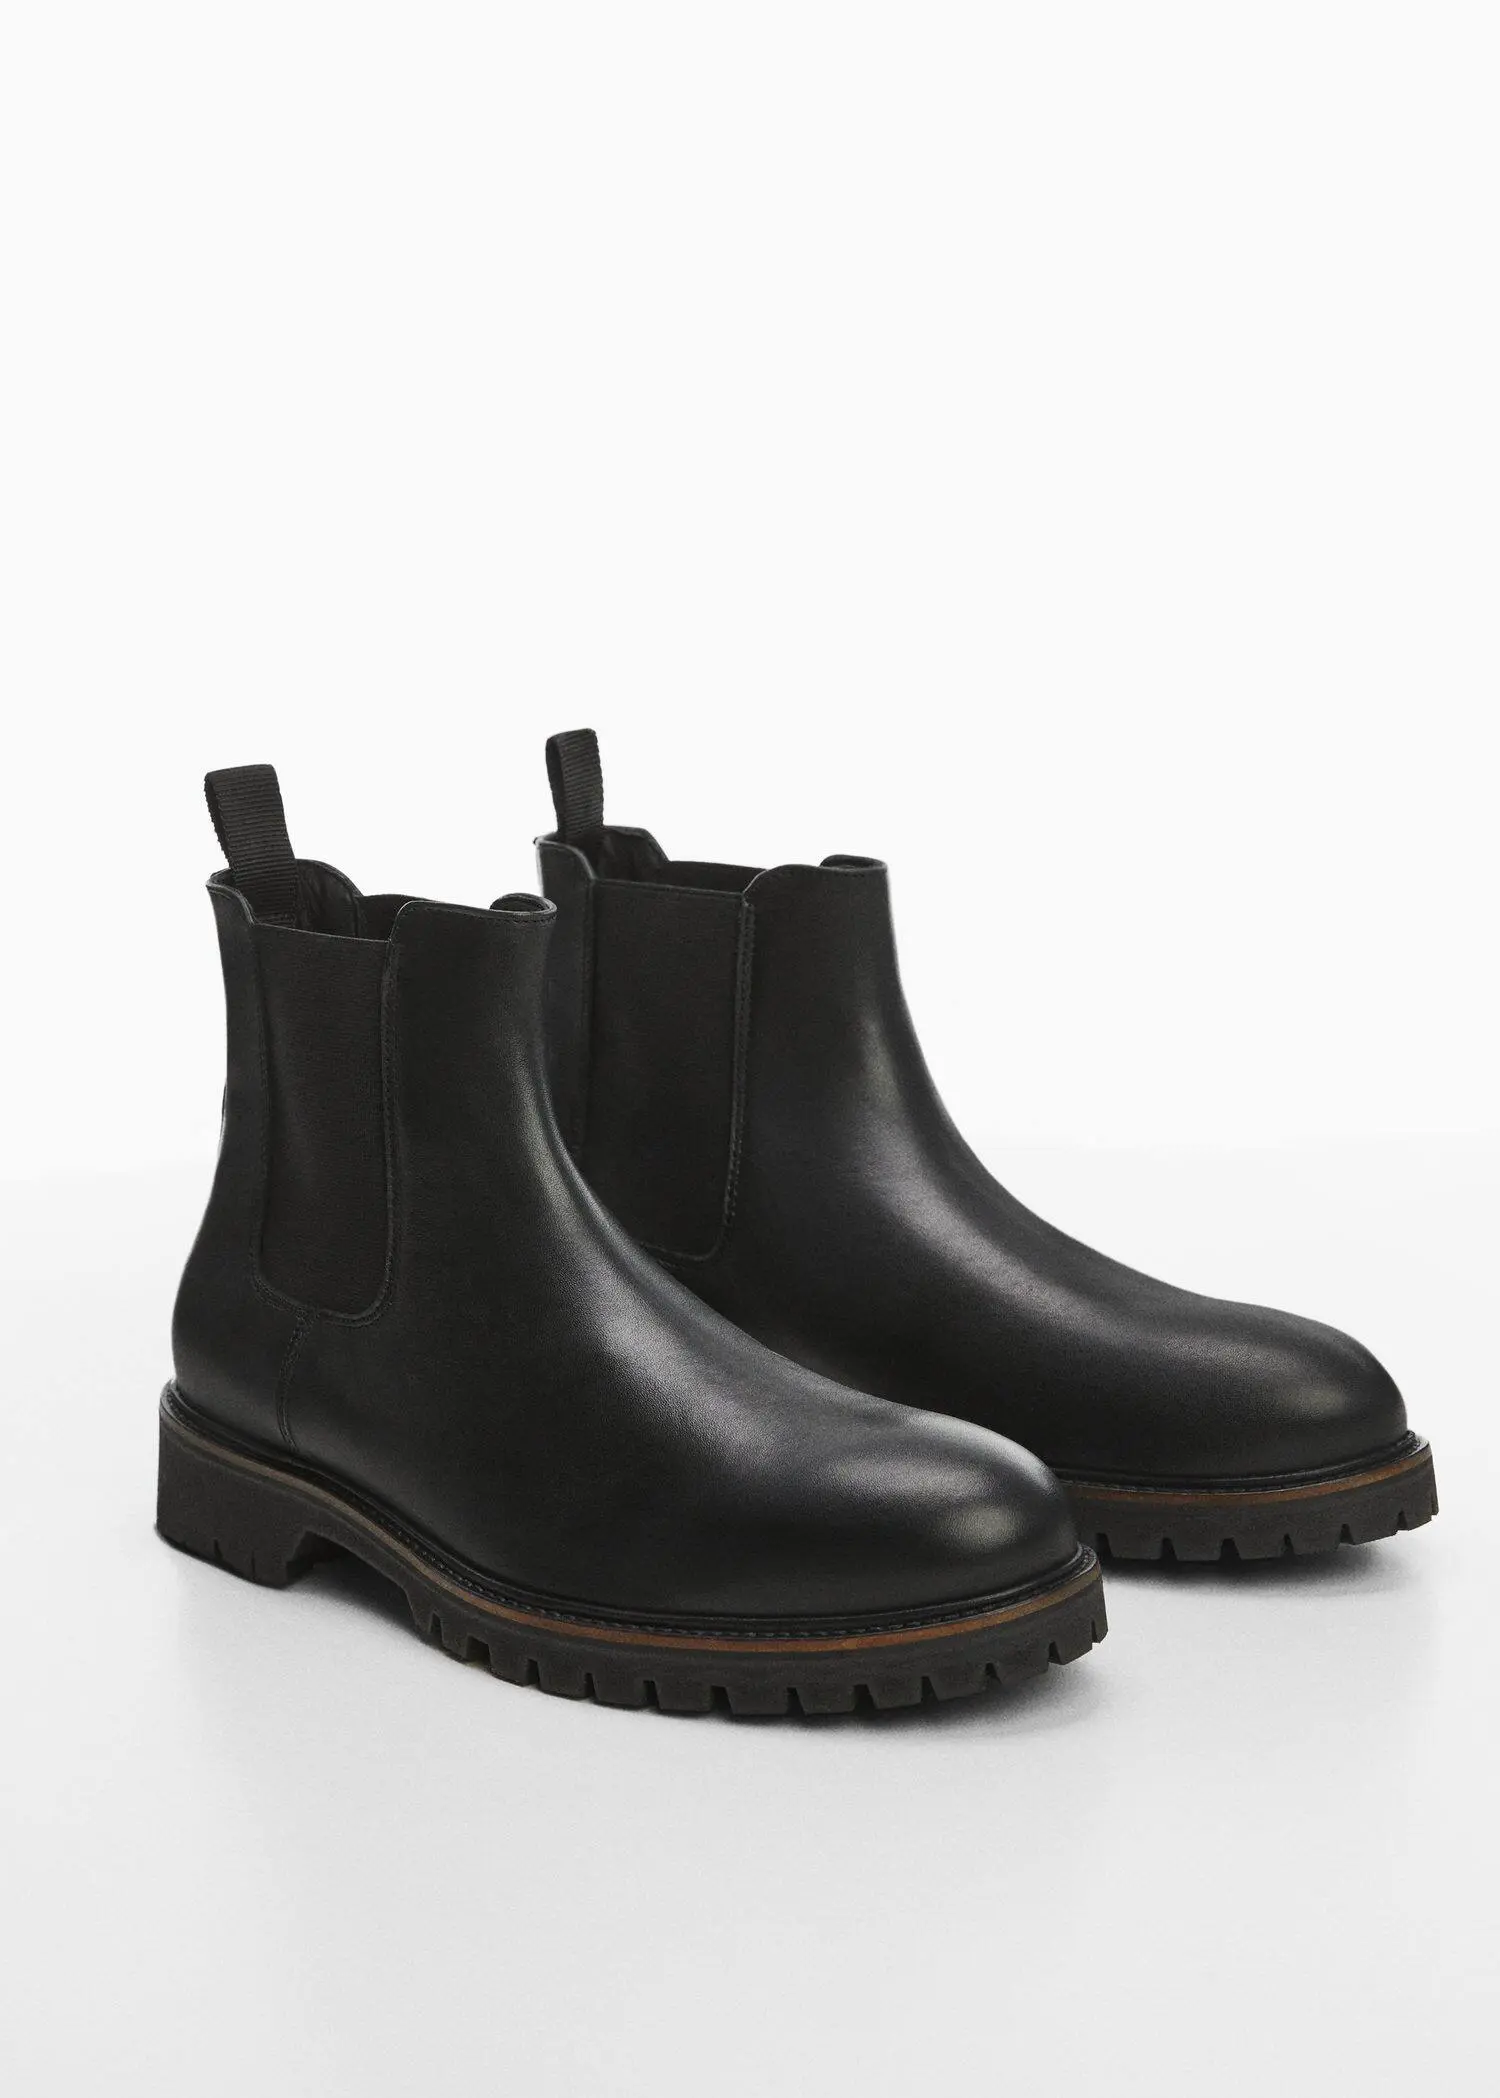 Mango Chelsea leather ankle boots with track sole. 2